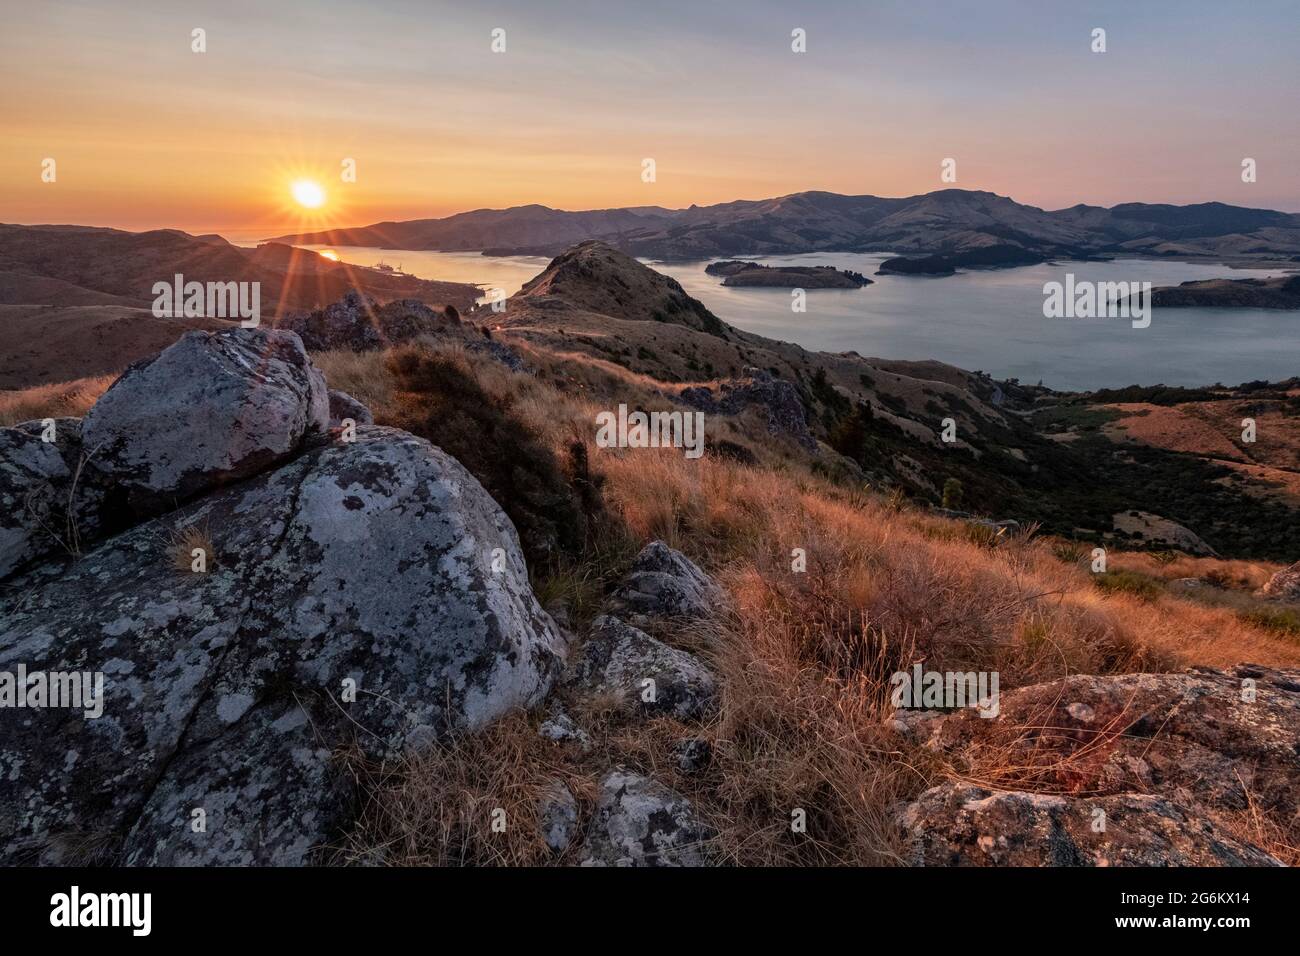 Sunrise over a rocky and grassy hill in the Porthills, Christchurch, Aotearoa New Zealand. Stock Photo